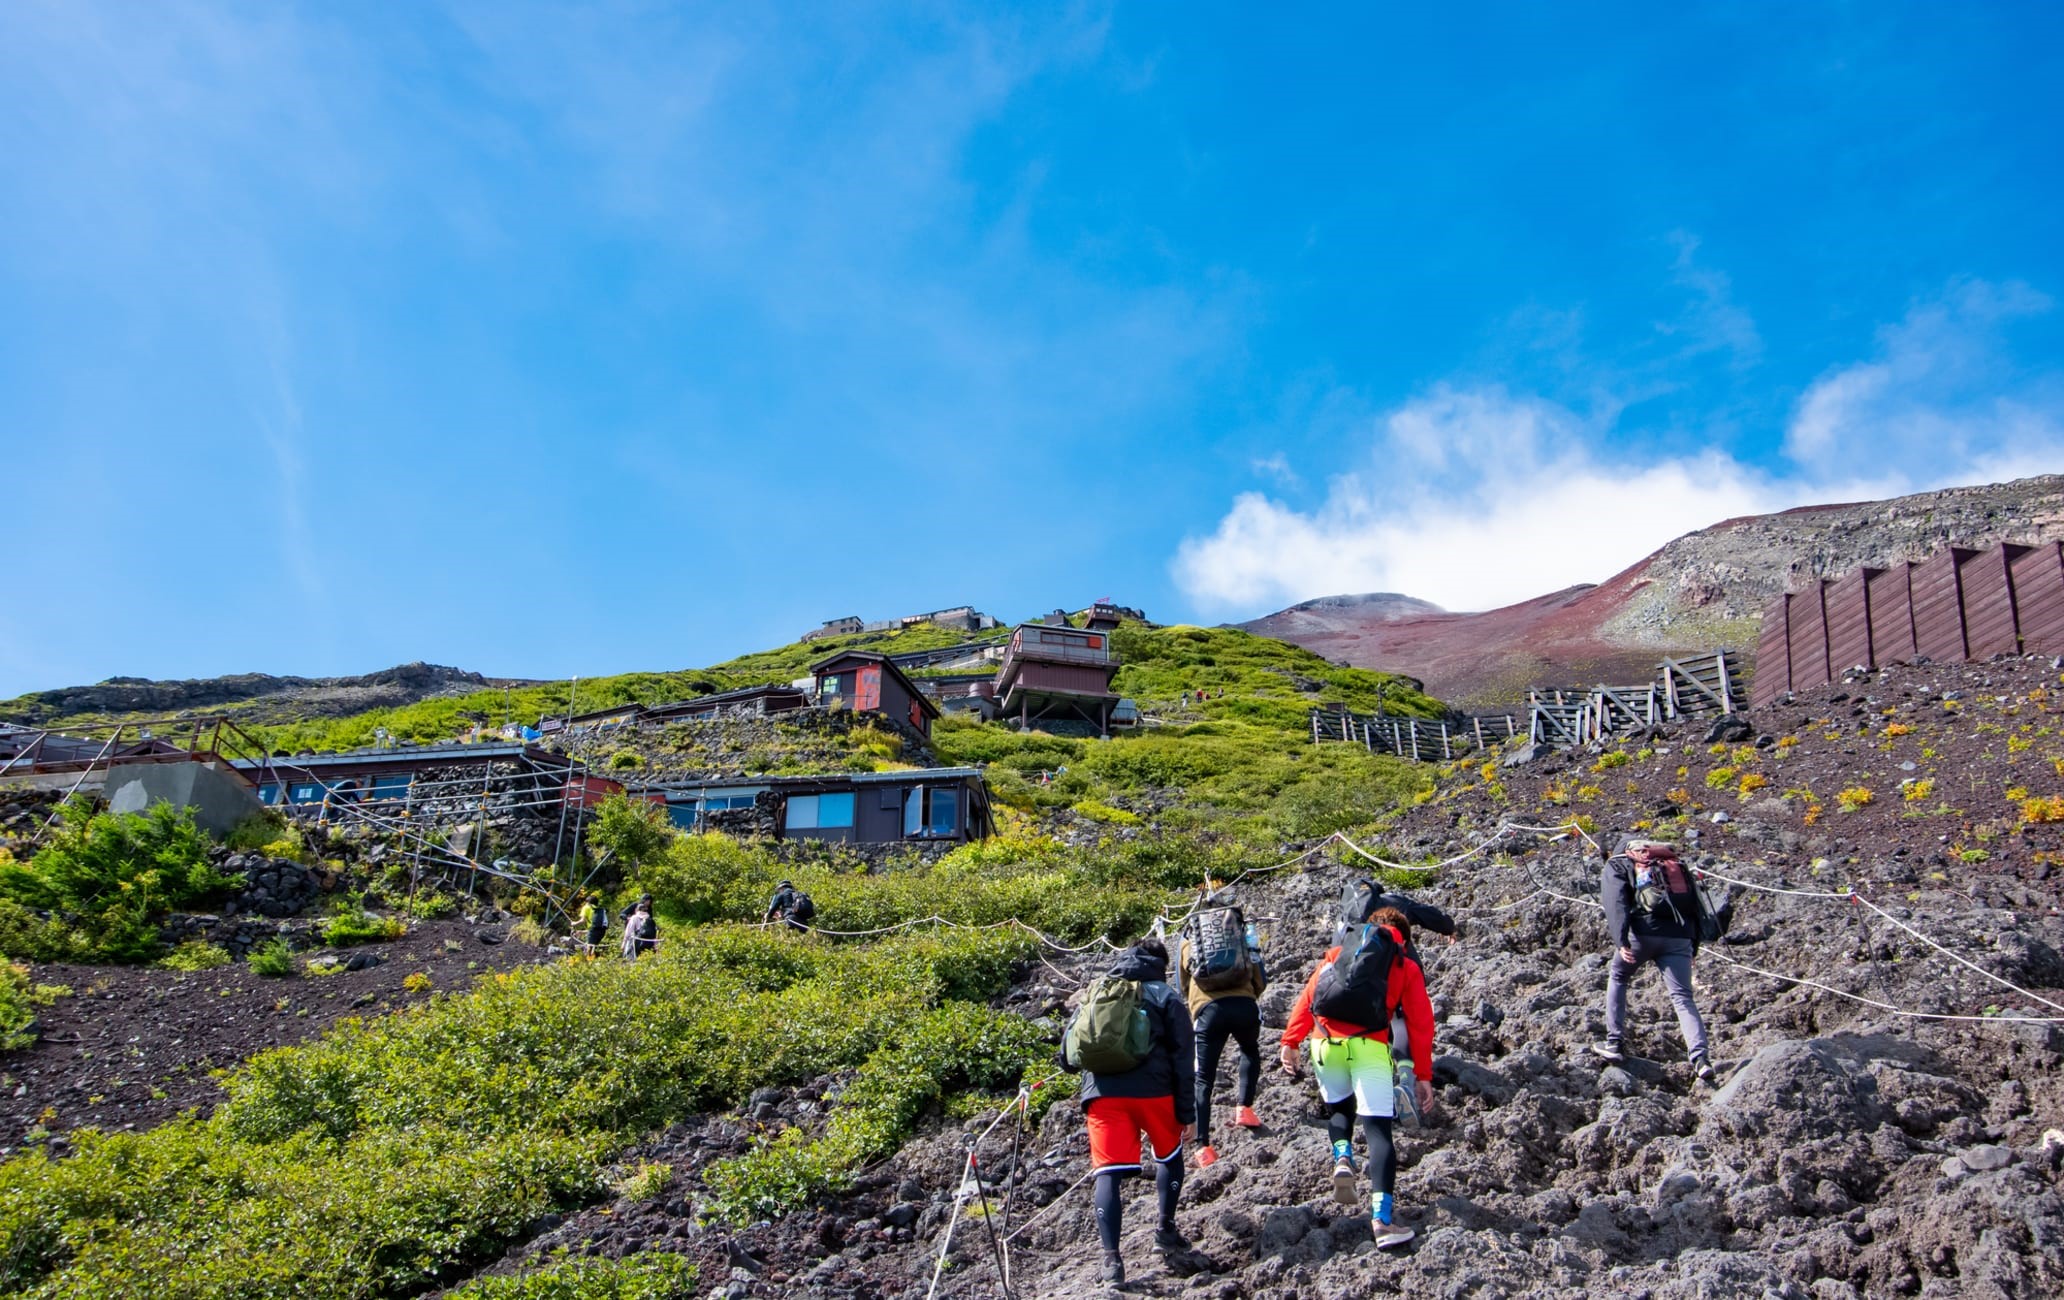 Up to 200,000 people visit the slopes of Mount Fuji each year to climb it